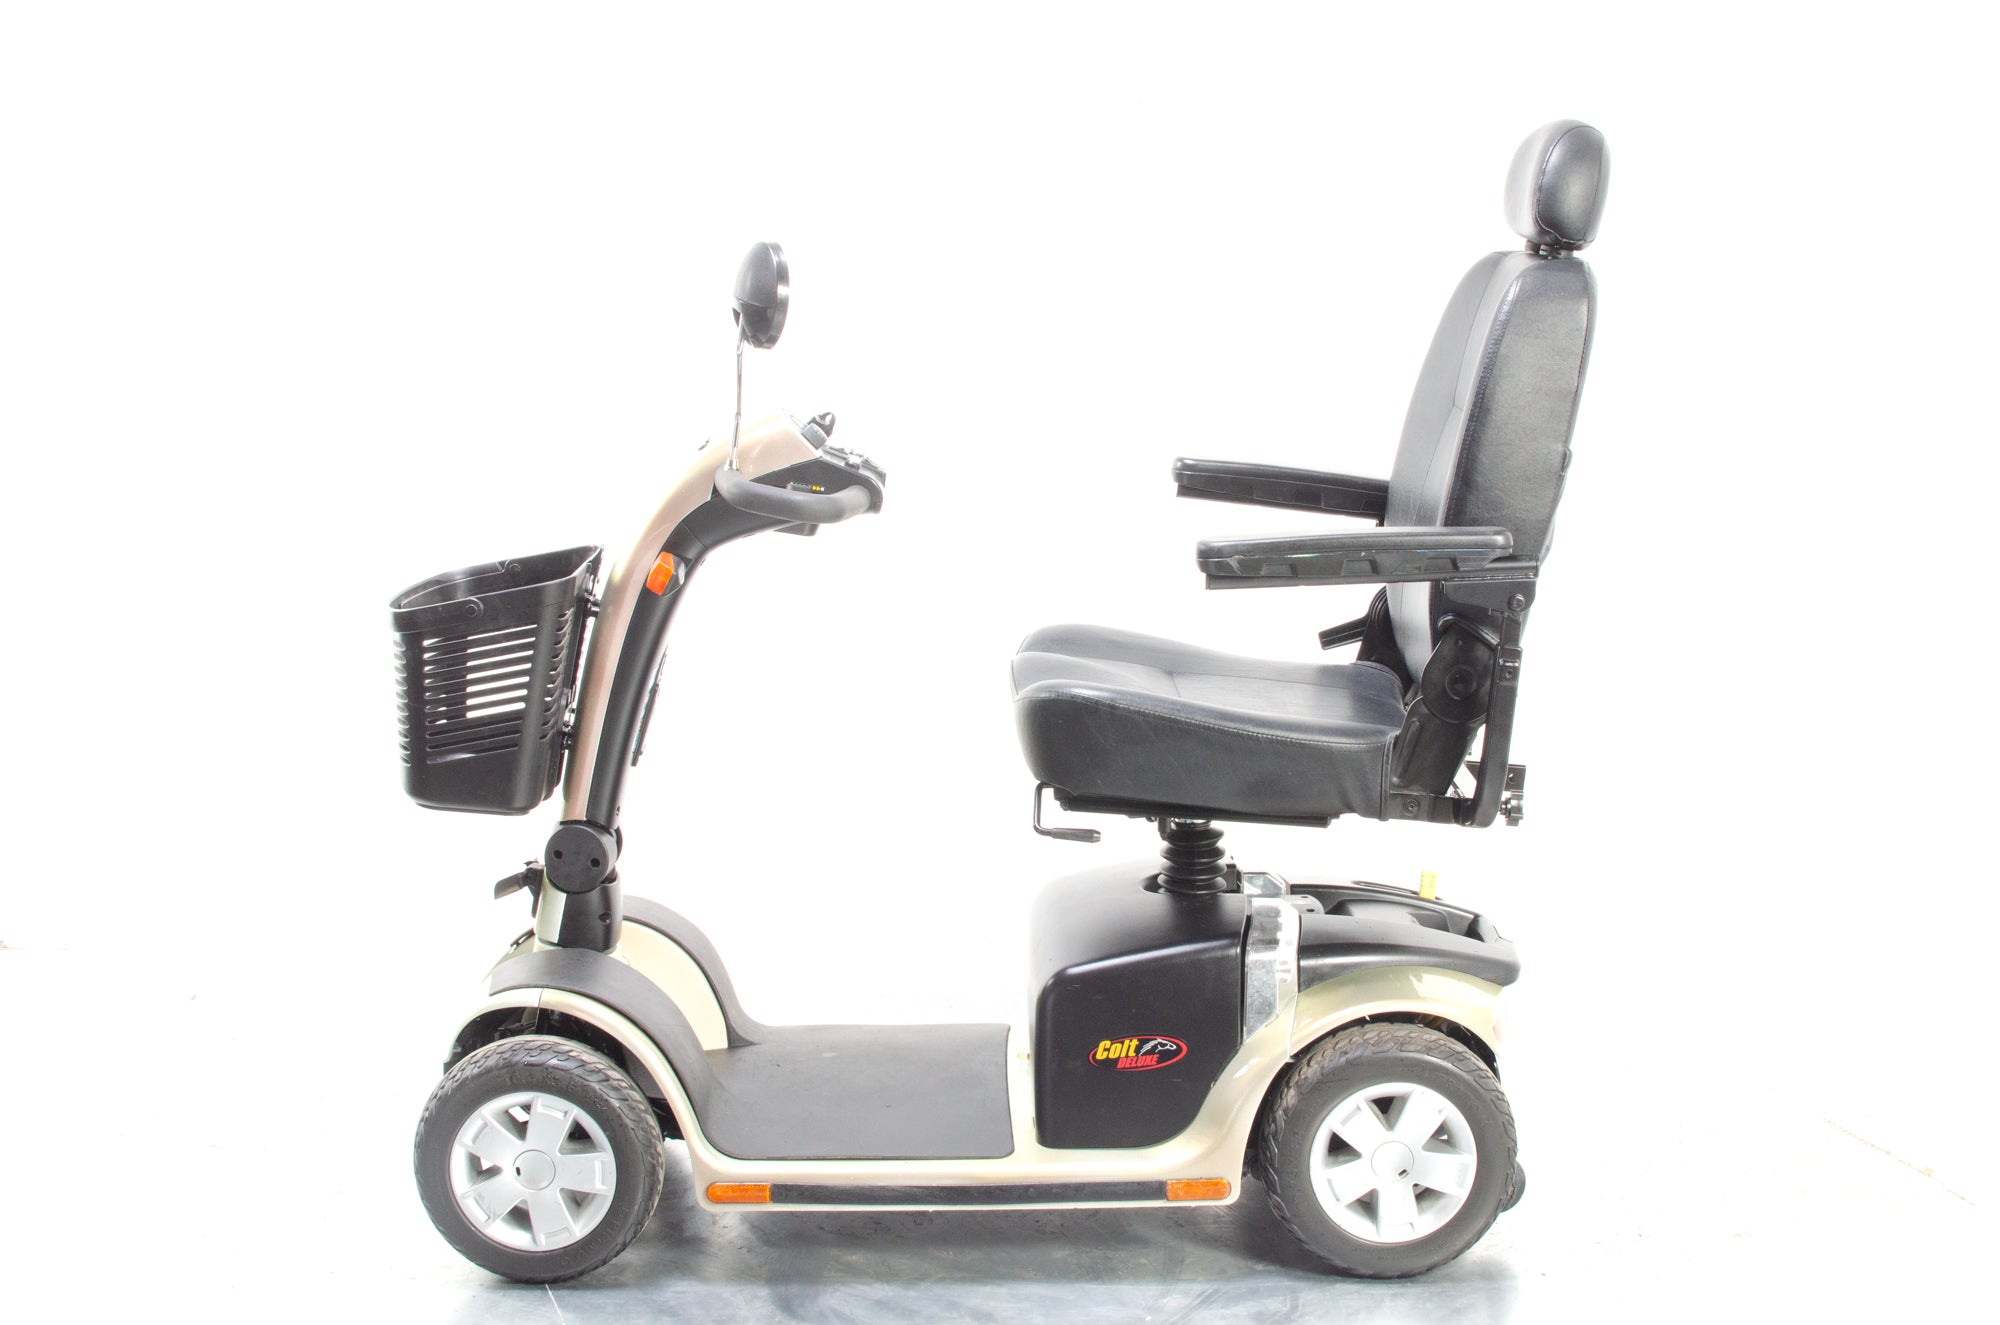 Pride Colt Deluxe Used Mobility Scooter 6mph Transportable Road Pavement Champagne